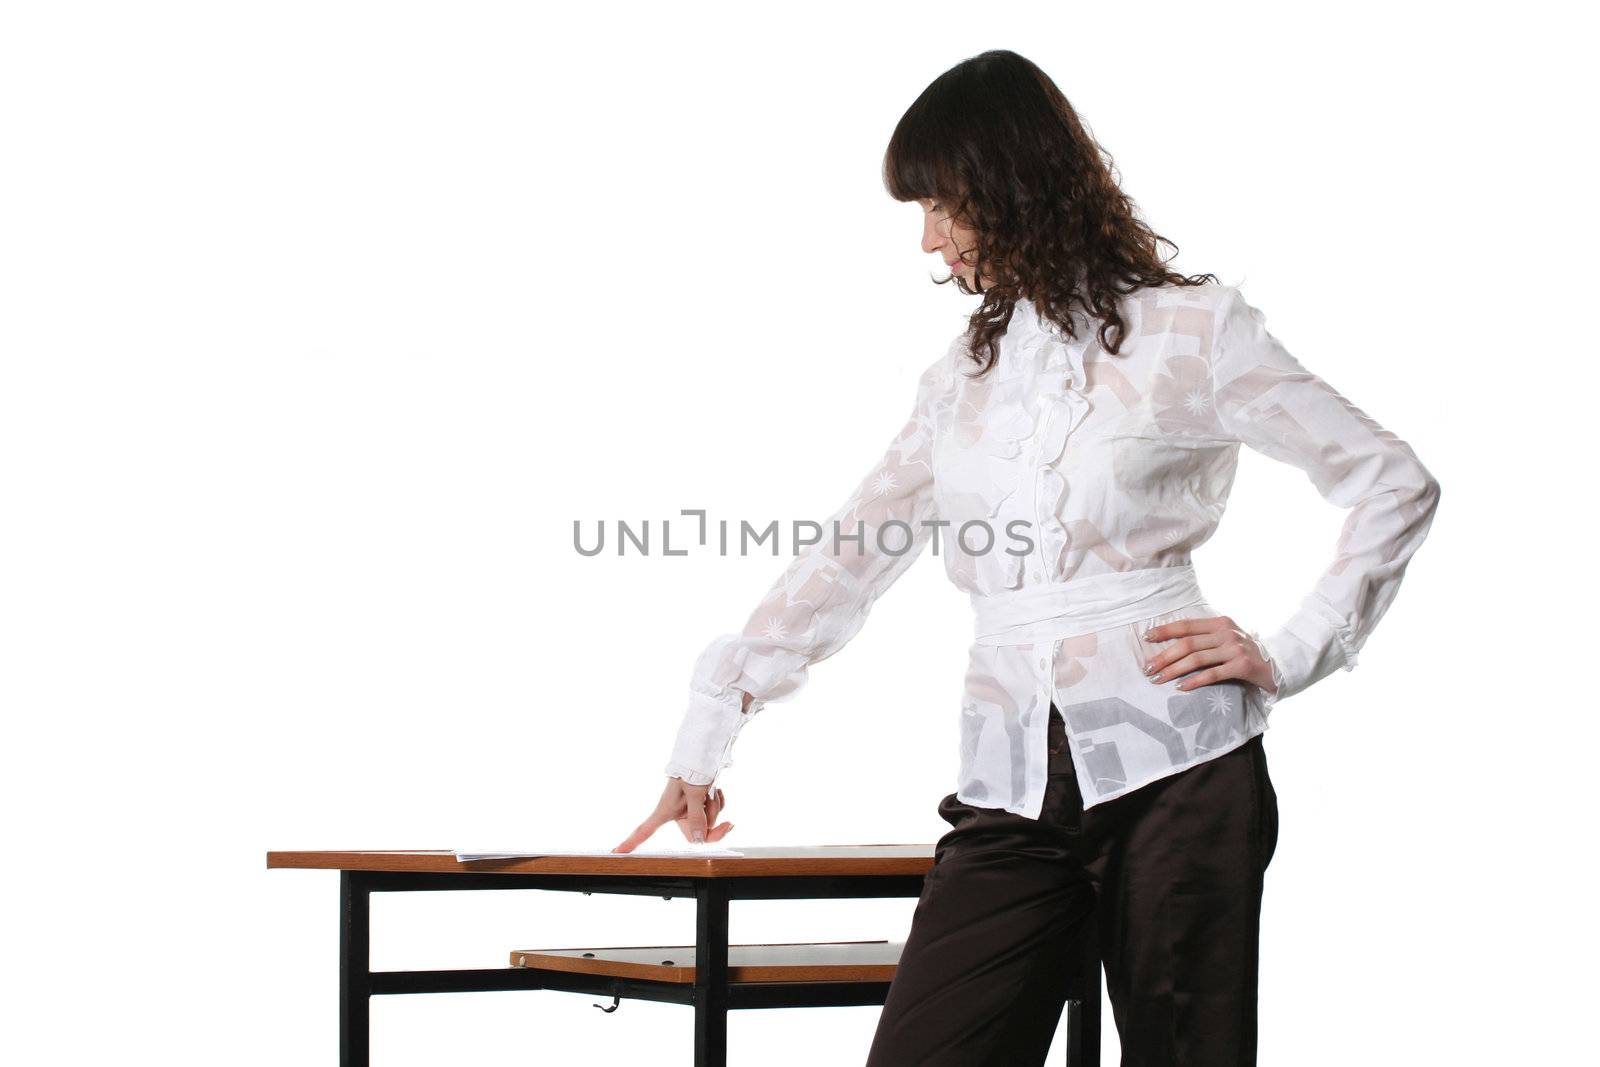 The business woman studies documents laying on a table